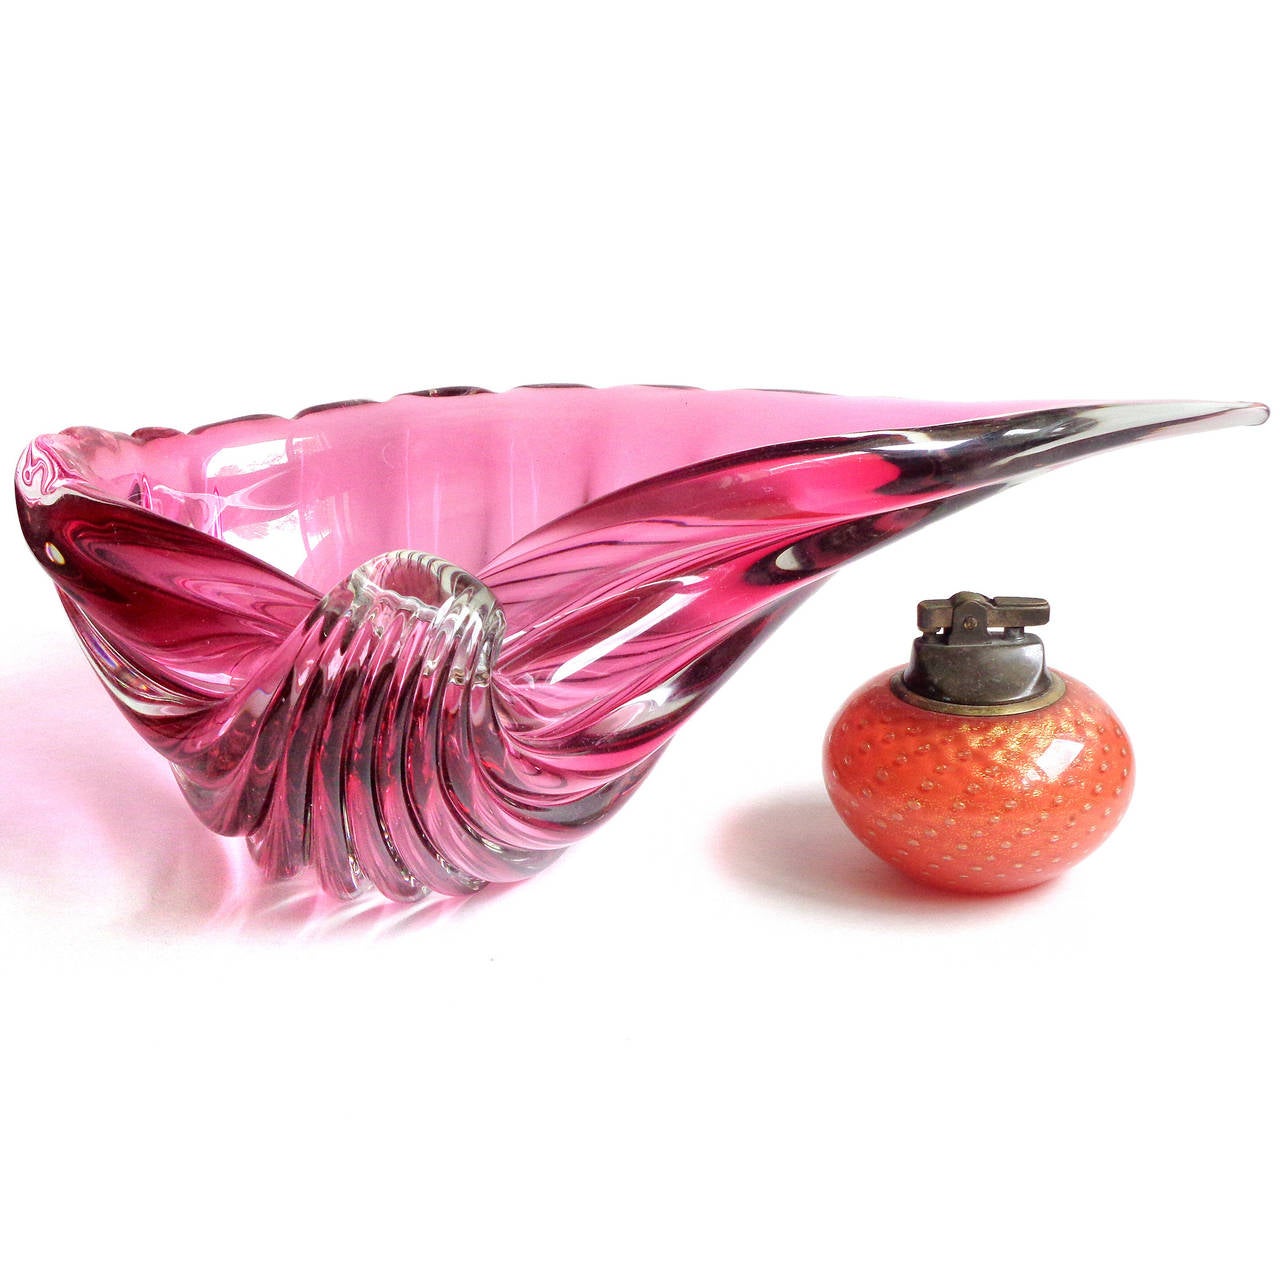 Very large Murano hand blown Sommerso pink Italian art glass seashell centerpiece sculptural bowl. Documented to Alfredo Barbini, circa 1950-1960s. One of the largest shells in my collection. Can be functional, as a fruit bowl or flower vase. Also